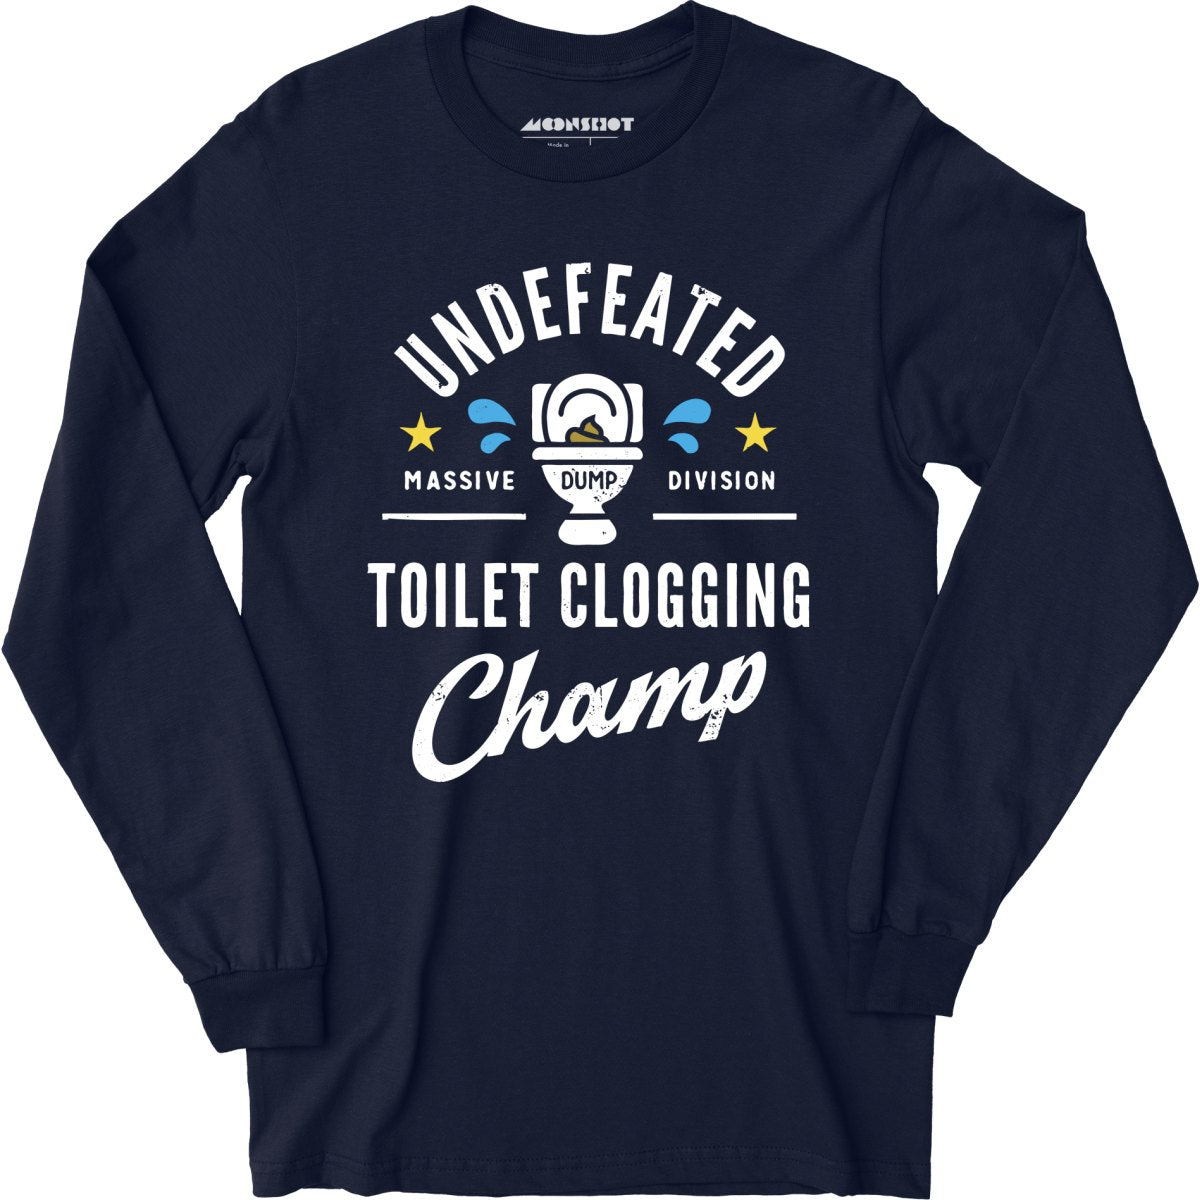 Undefeated Toilet Clogging Champ - Long Sleeve T-Shirt